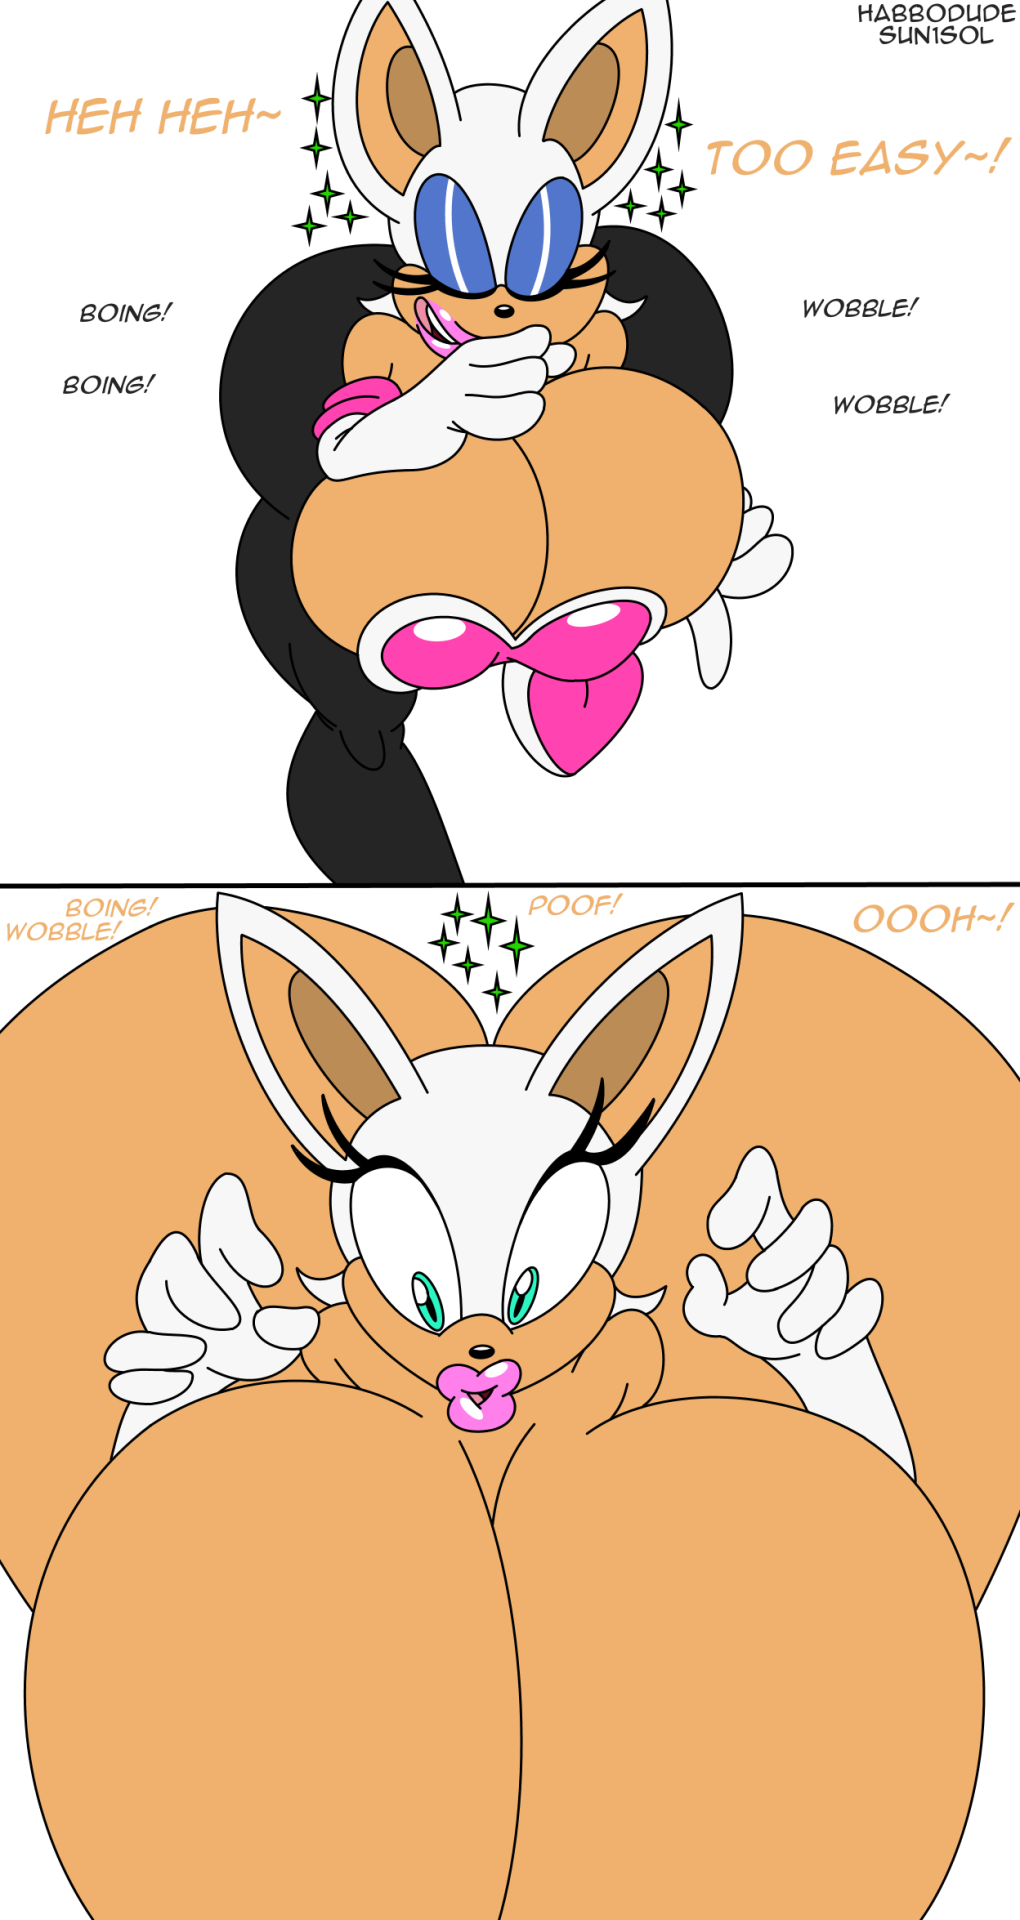 thecooltiny:  Rouge The Cupid Rouge and Amy are looking for a green emerald, but